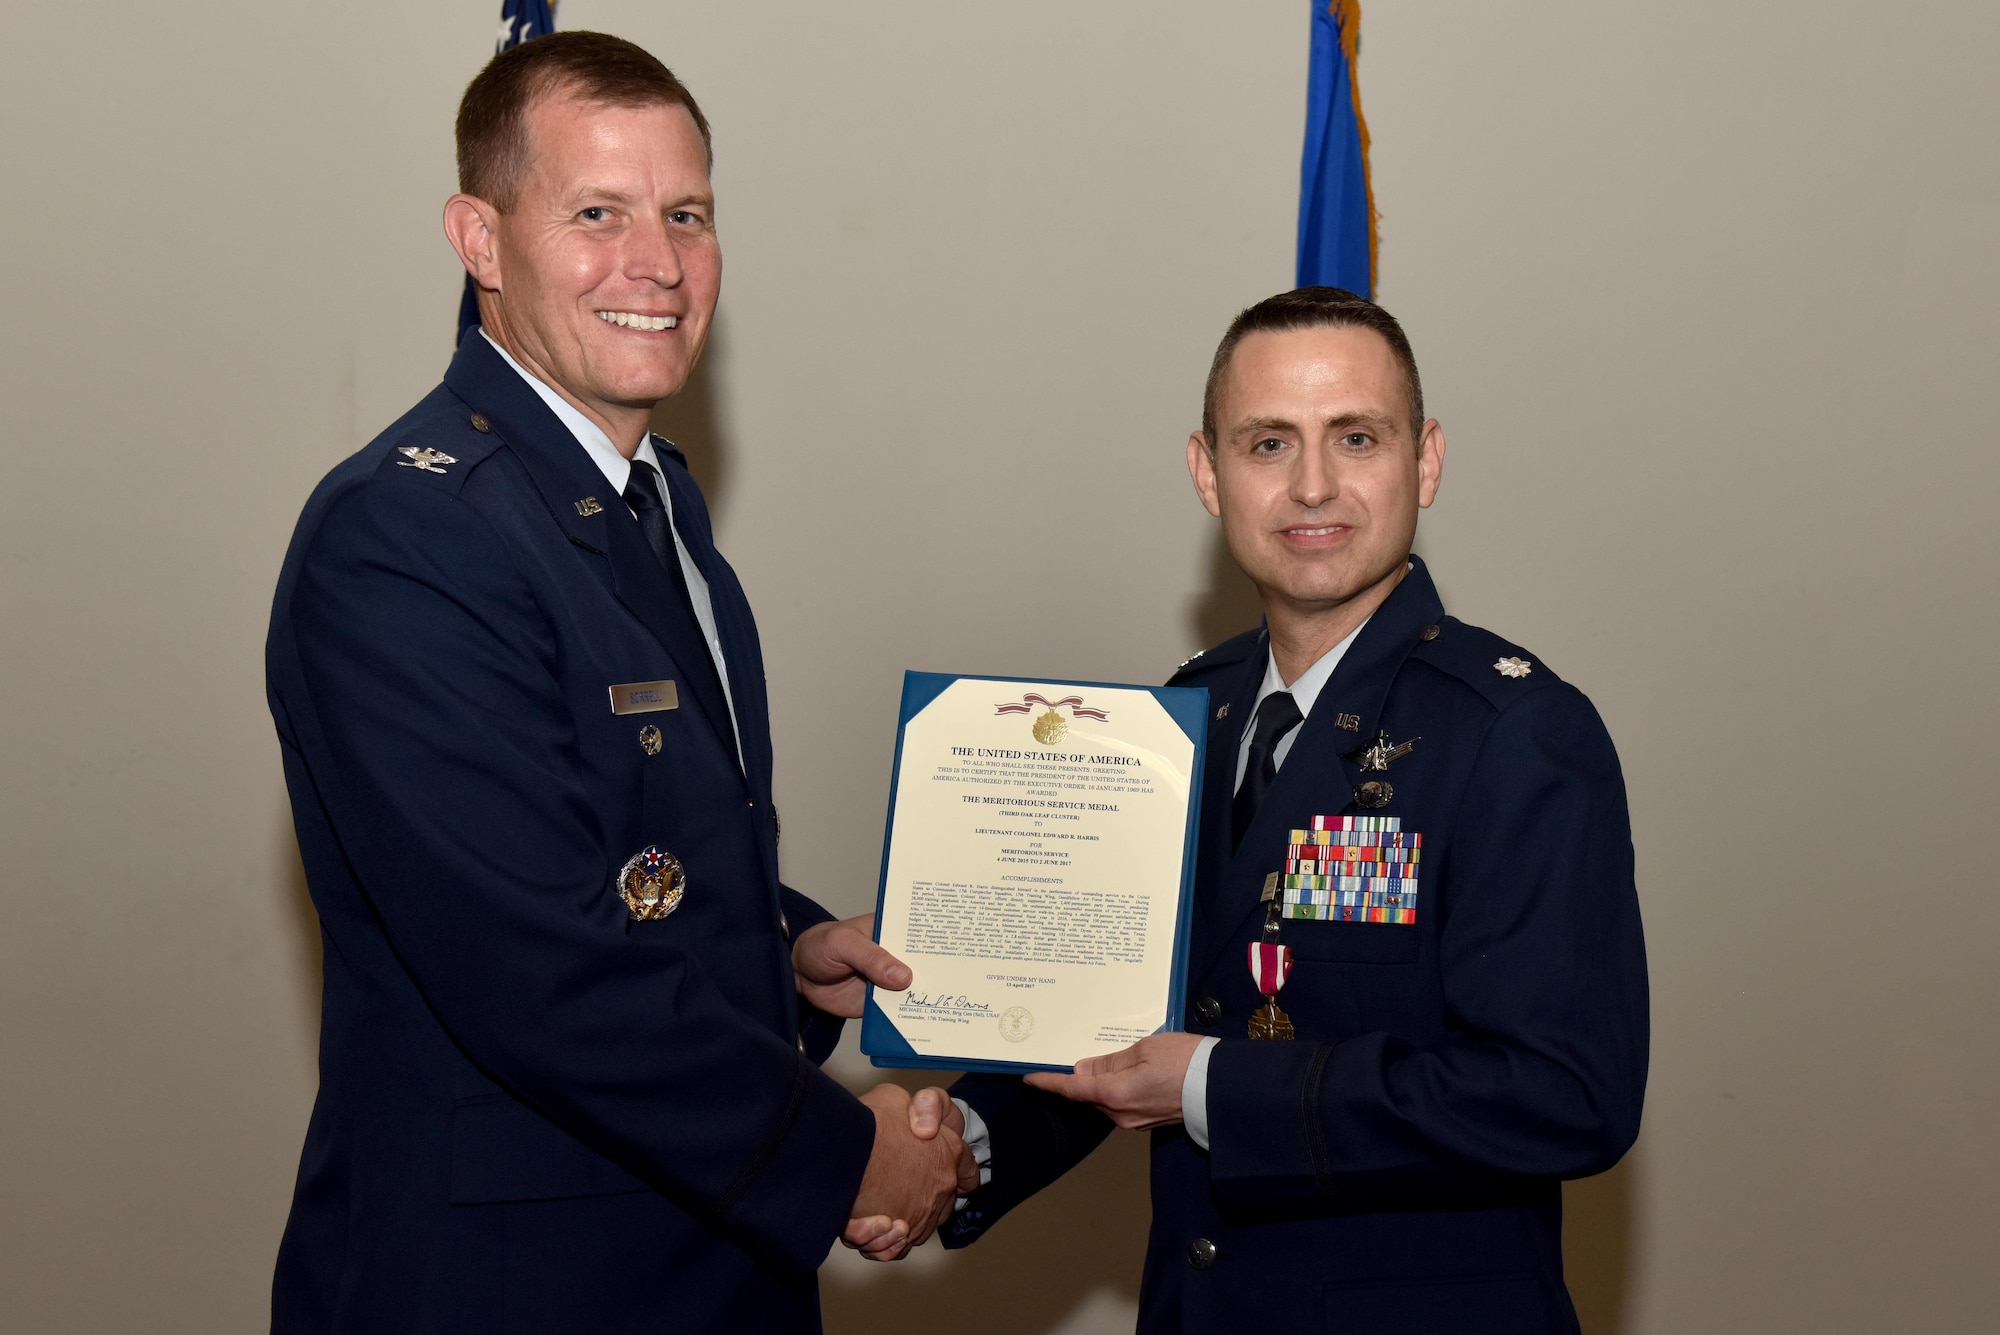 U.S. Air Force Col. Jeffery Sorrell, 17th Training Wing Vice Commander, presents a Meritorious Service certificate to Lt. Col. Edward Harris, 17th Comptroller Squadron Commander, during the 17th CPTS Change of Command ceremony at the Event Center on Goodfellow Air Force Base, Texas, June 2, 2017. The event honored Harris’ service to his unit and welcomed its new commander Maj. Nelson Mitchell. (U.S. Air Force photo by Staff Sgt. Joshua Edwards/Released)